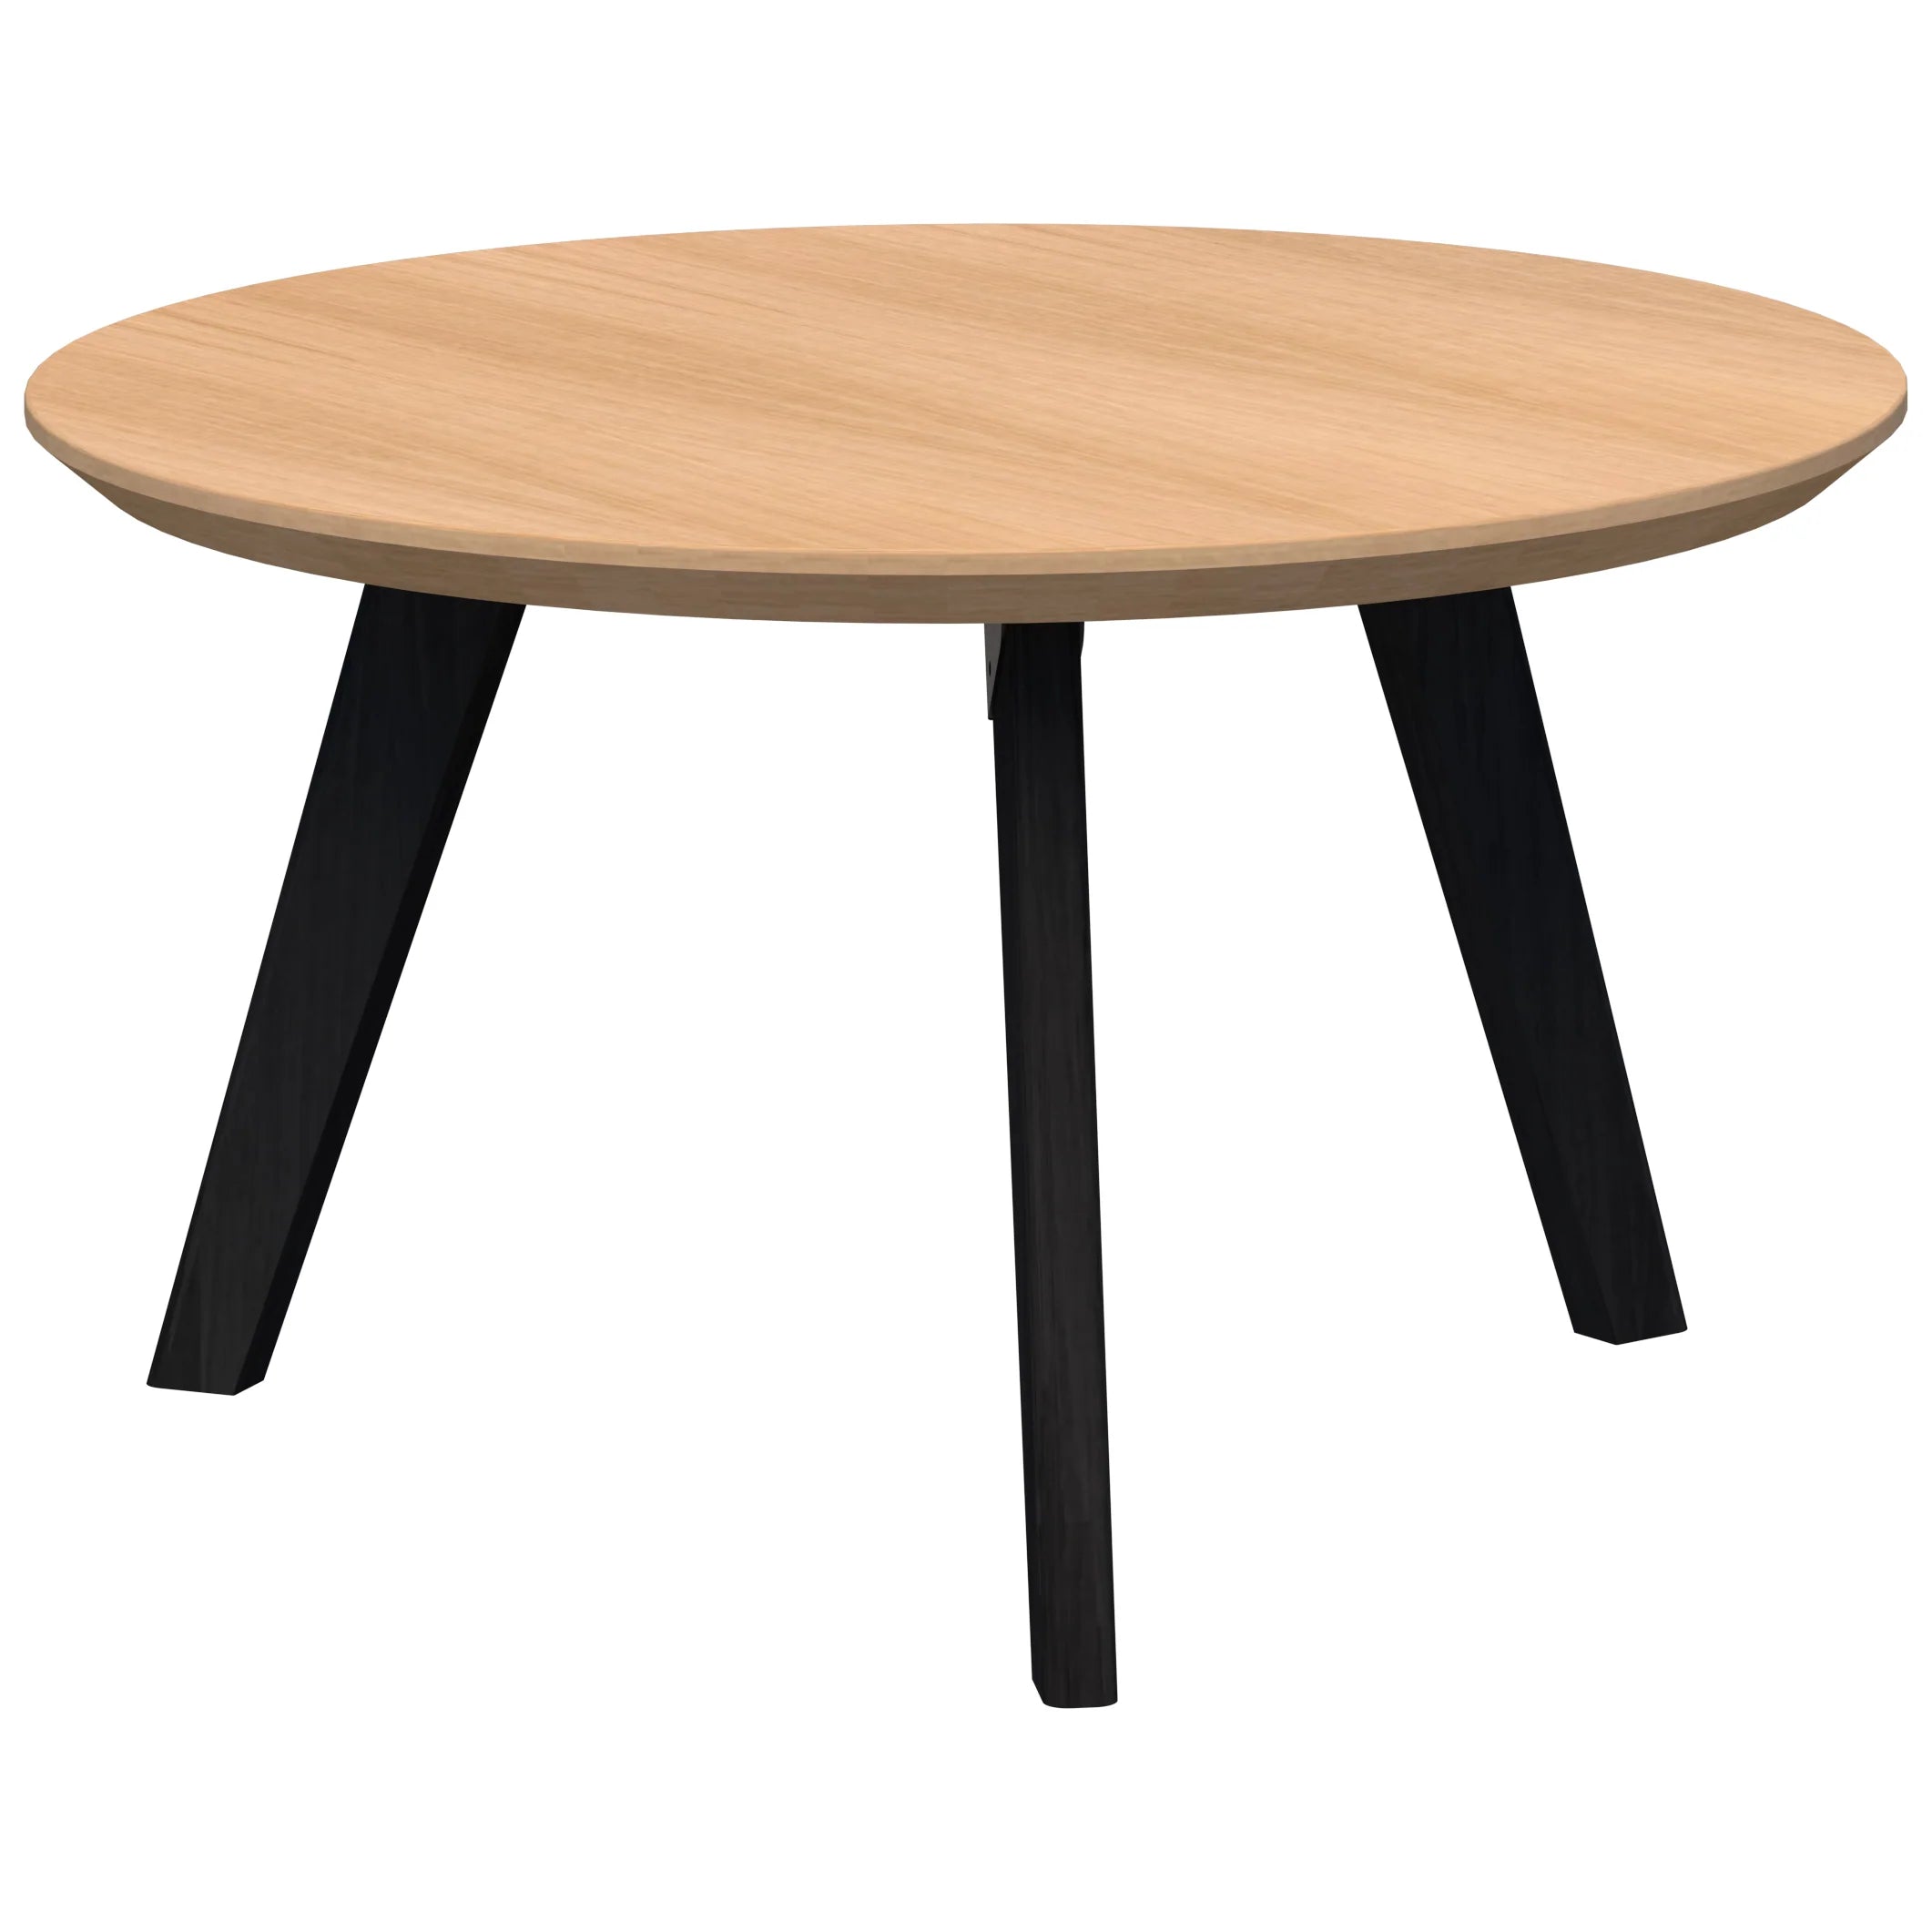 Oslo round coffee table with black stained ash timber frame and veneer ash top.